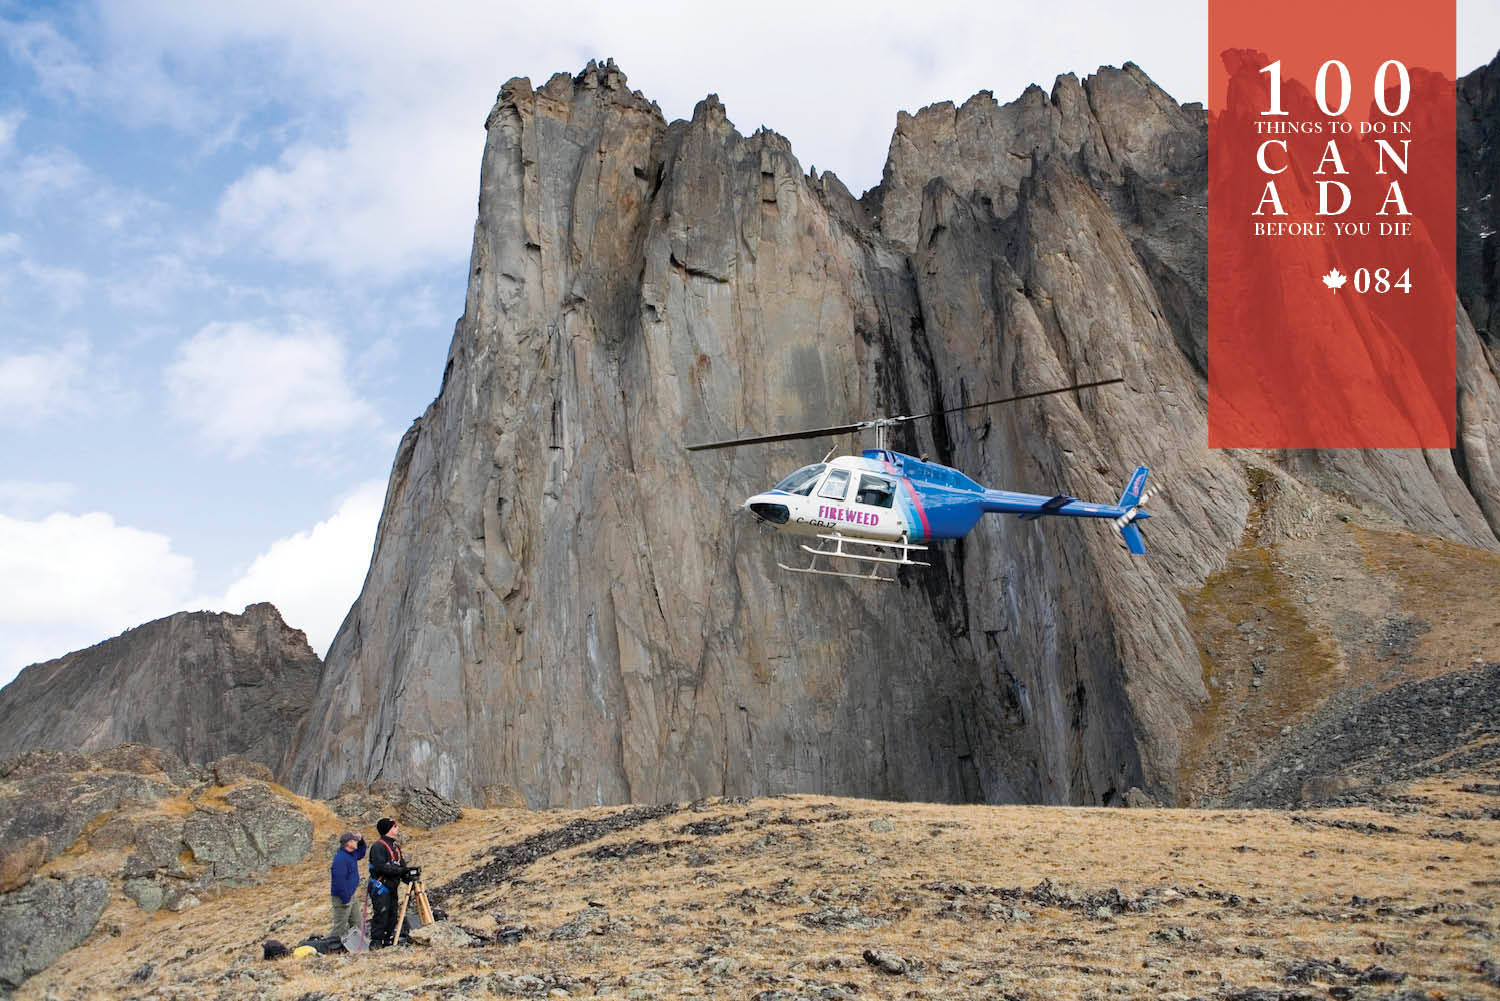 Soar above the craggy peaks of Canada's Tombstone